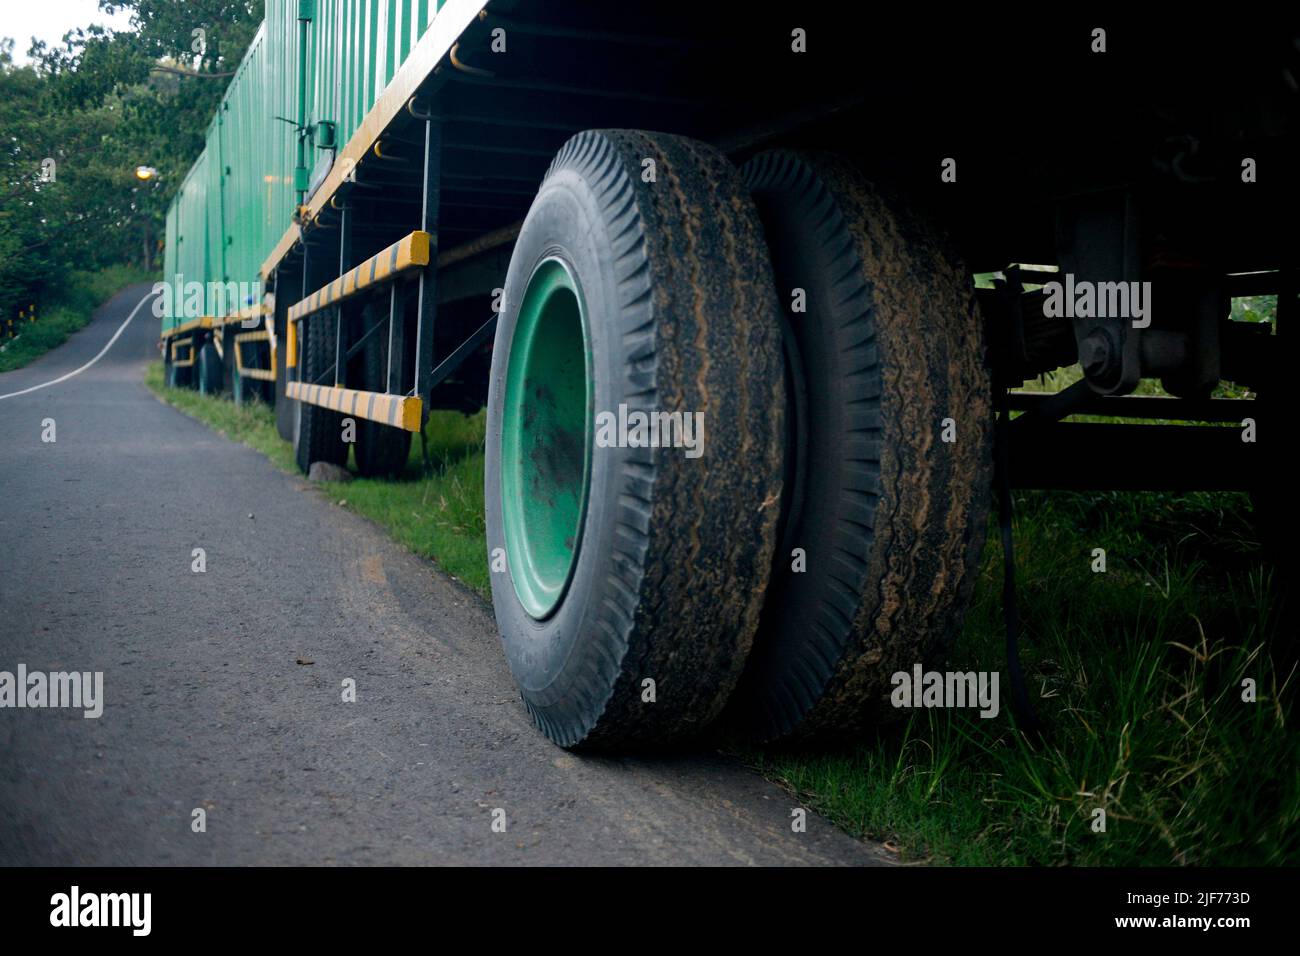 Wheel of truck on the side road Stock Photo